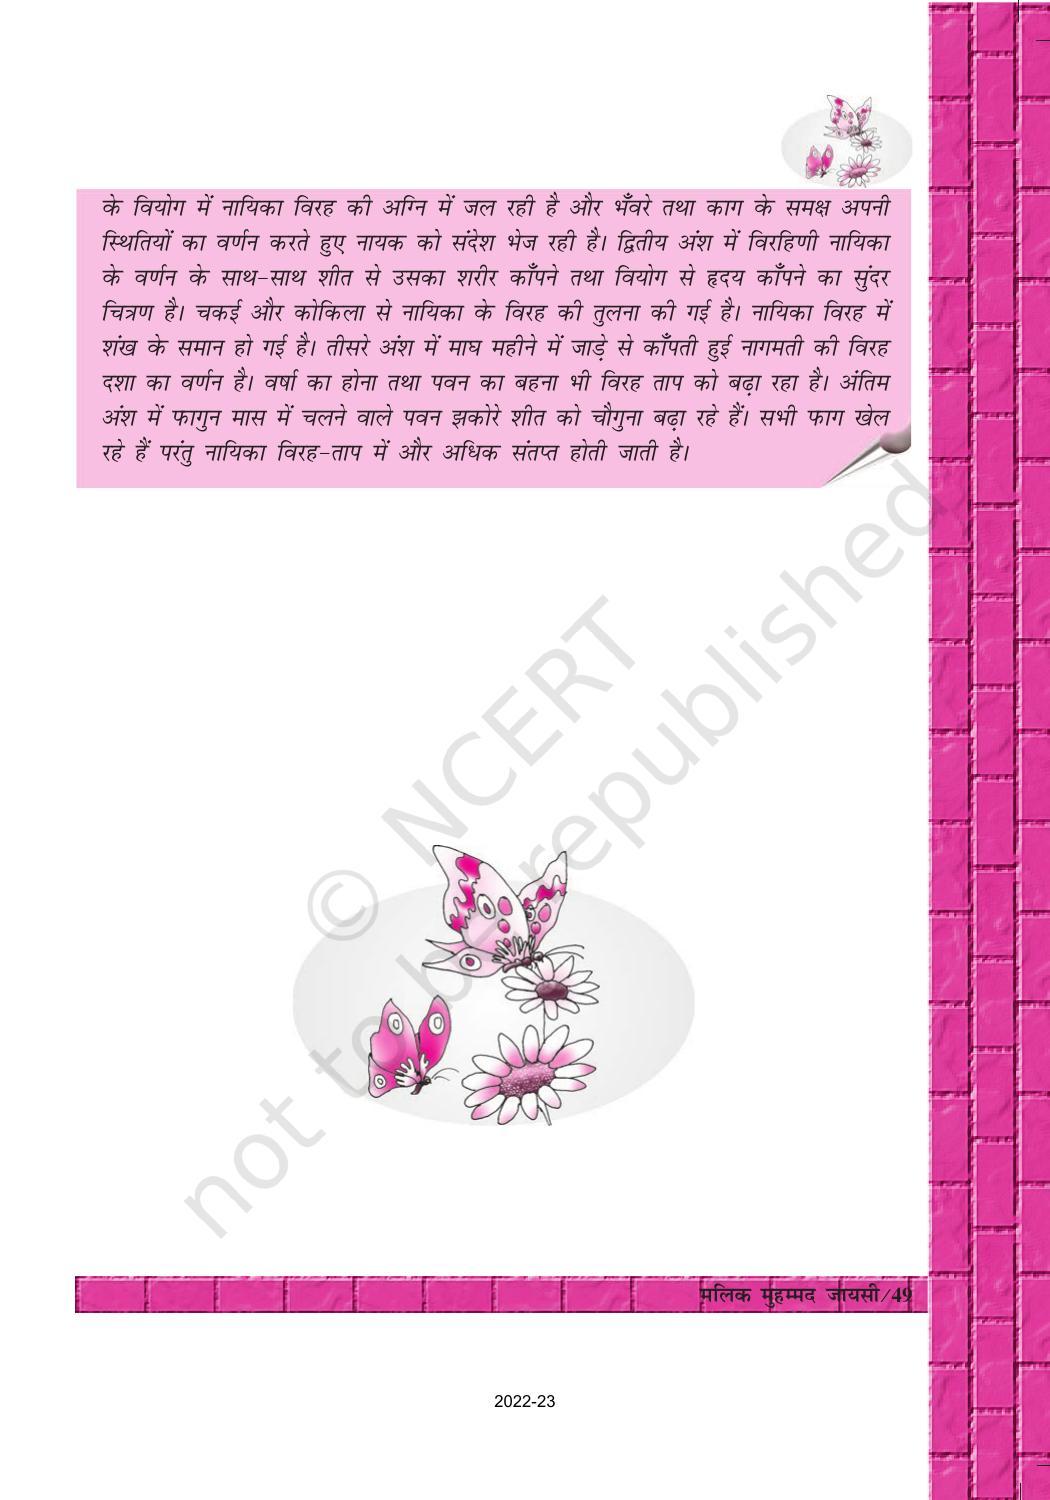 NCERT Book for Class 12 Hindi Antra Chapter 8 मलिक मुहम्मद जायसी - Page 2